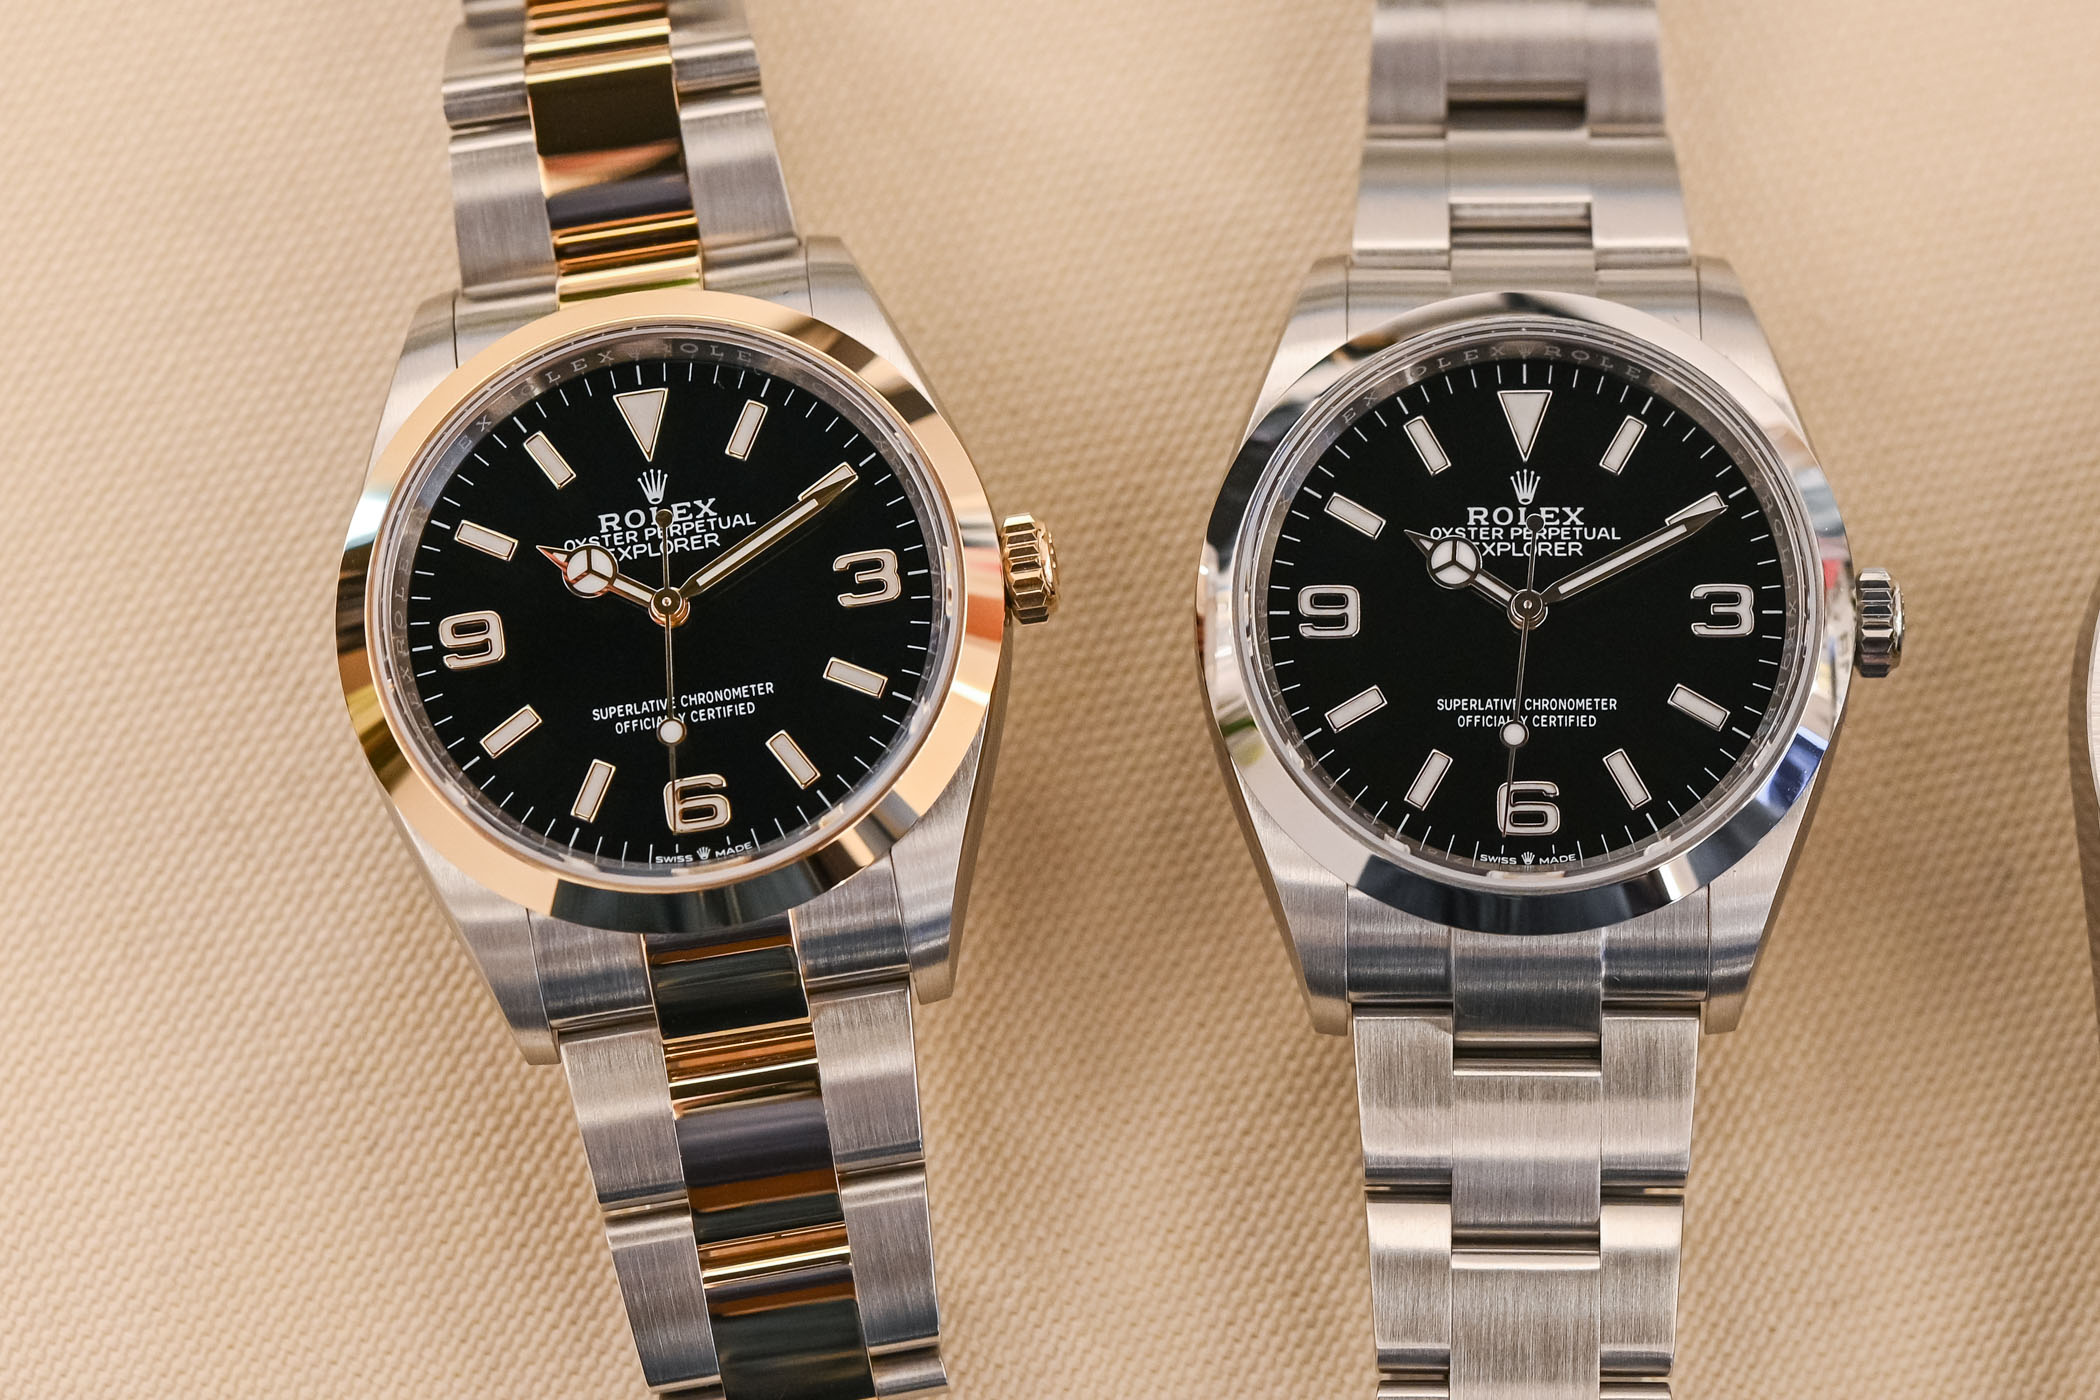 Hands-On - Rolex 1 124270 and 124273 (Price)